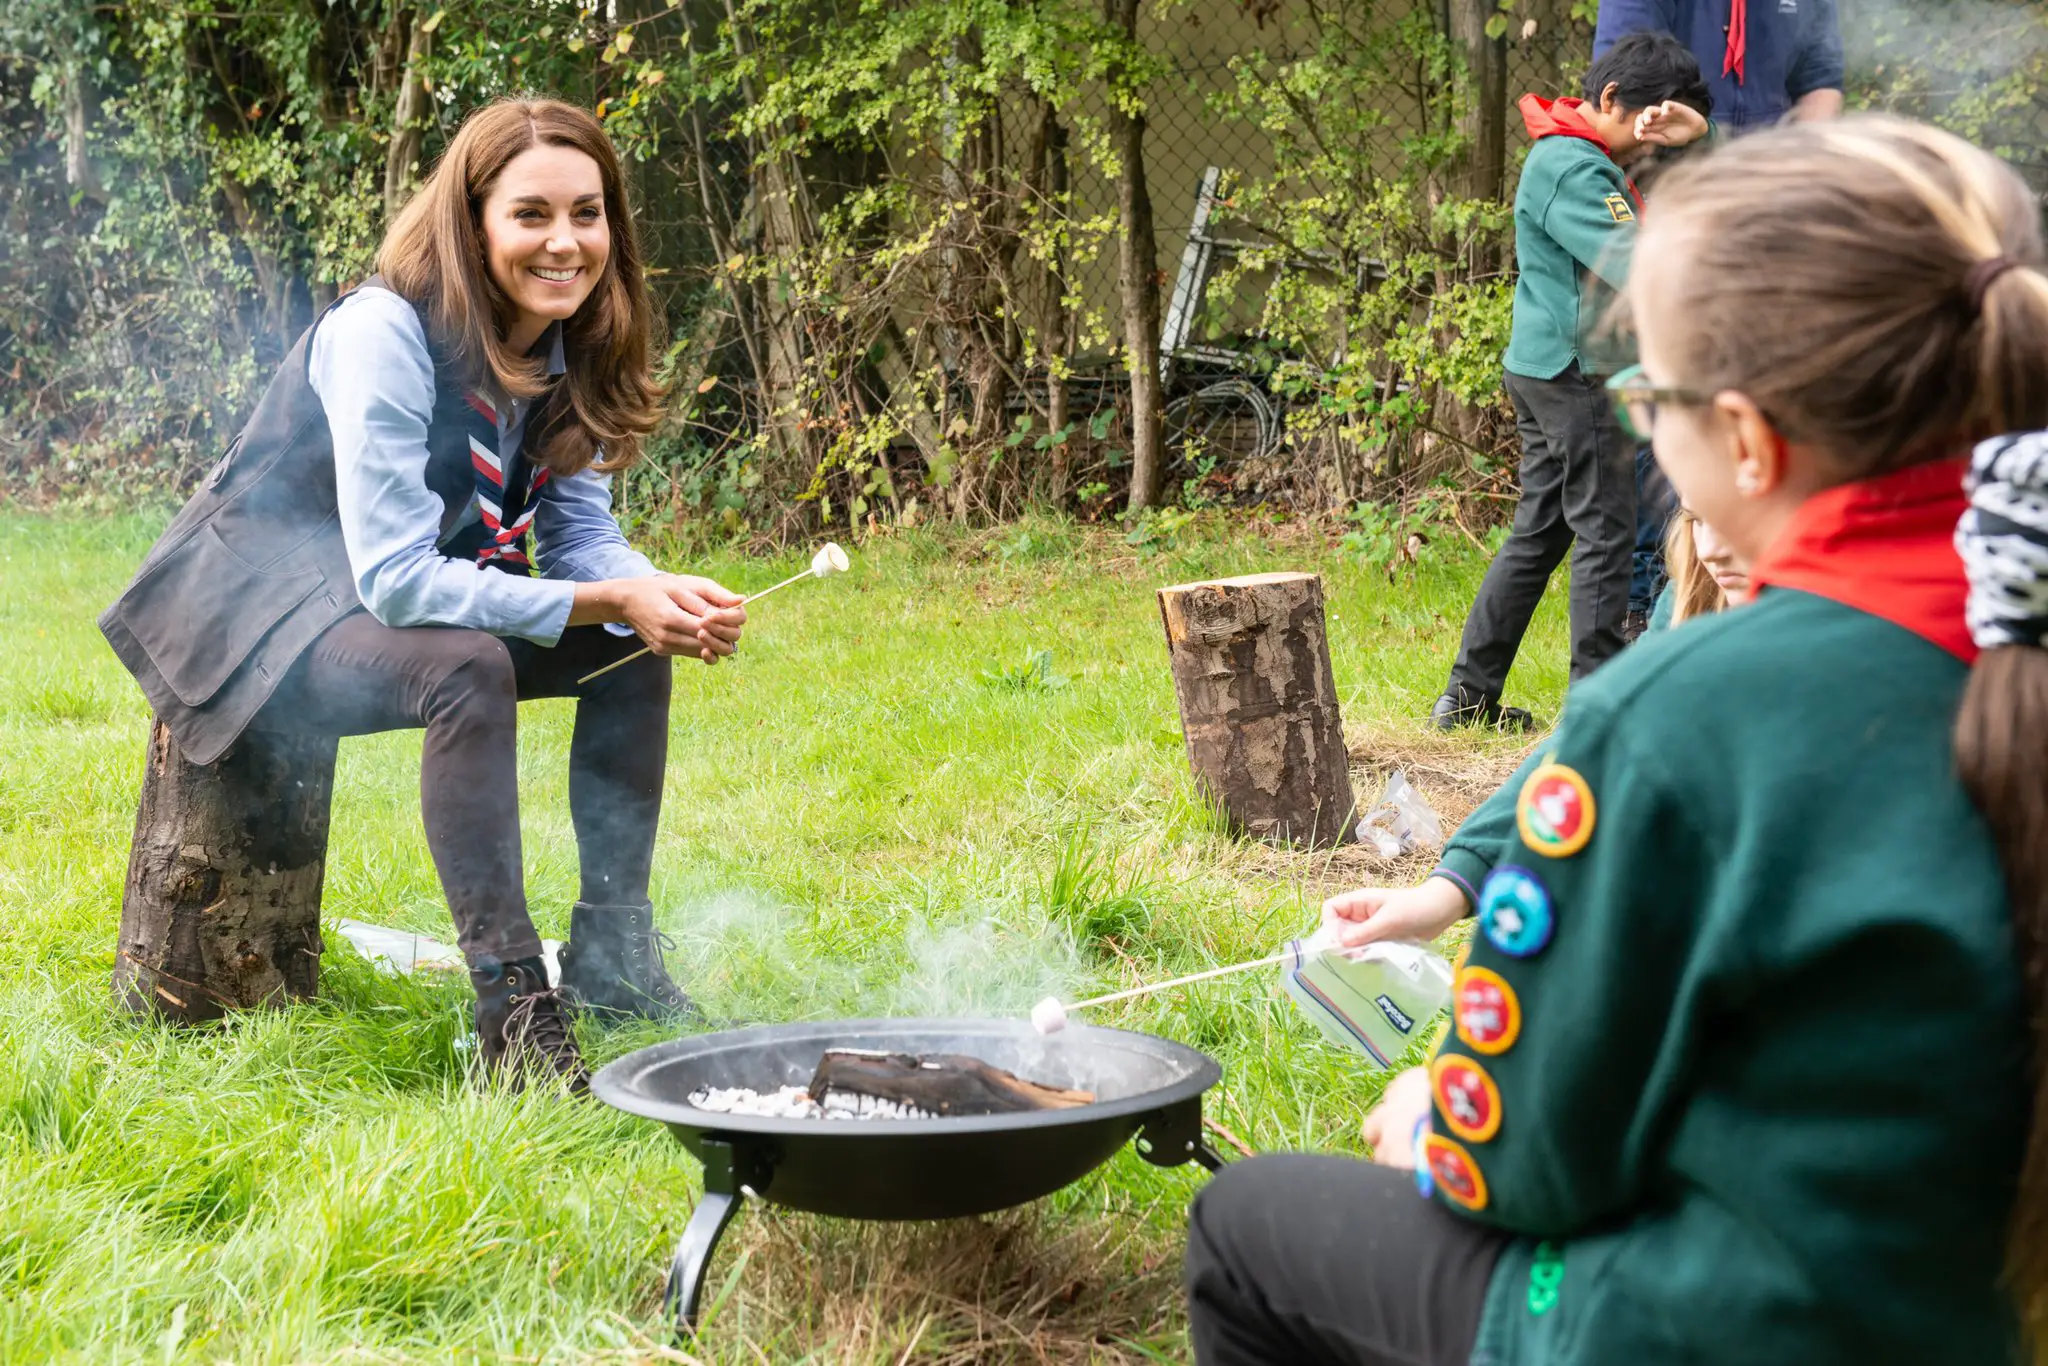 The Duchess of Cambridge became the Joint President of the UK Scouts Association